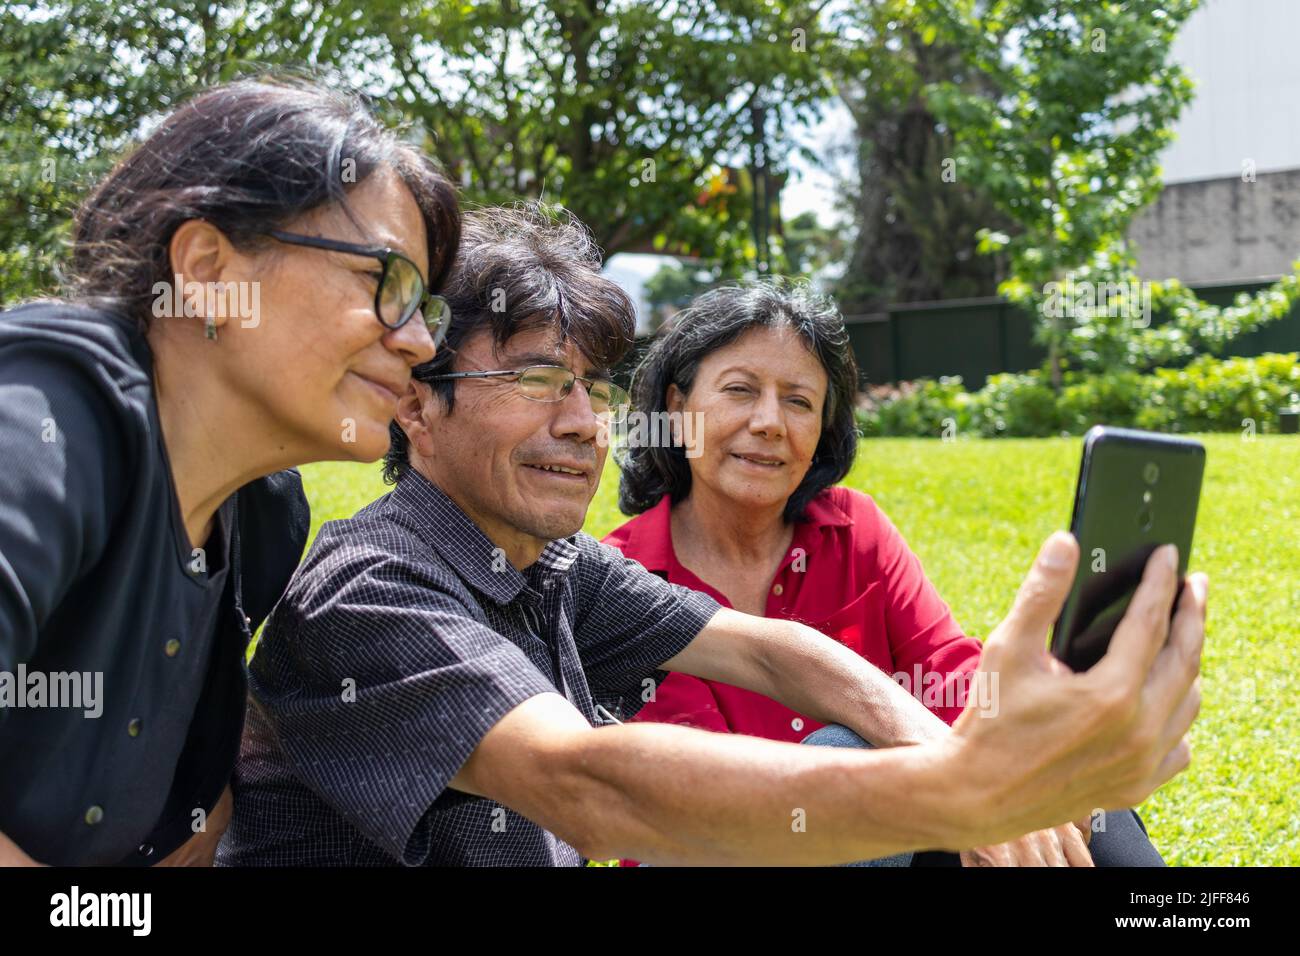 Group of middle aged latin friends taking a selfie and having fun in a park Stock Photo